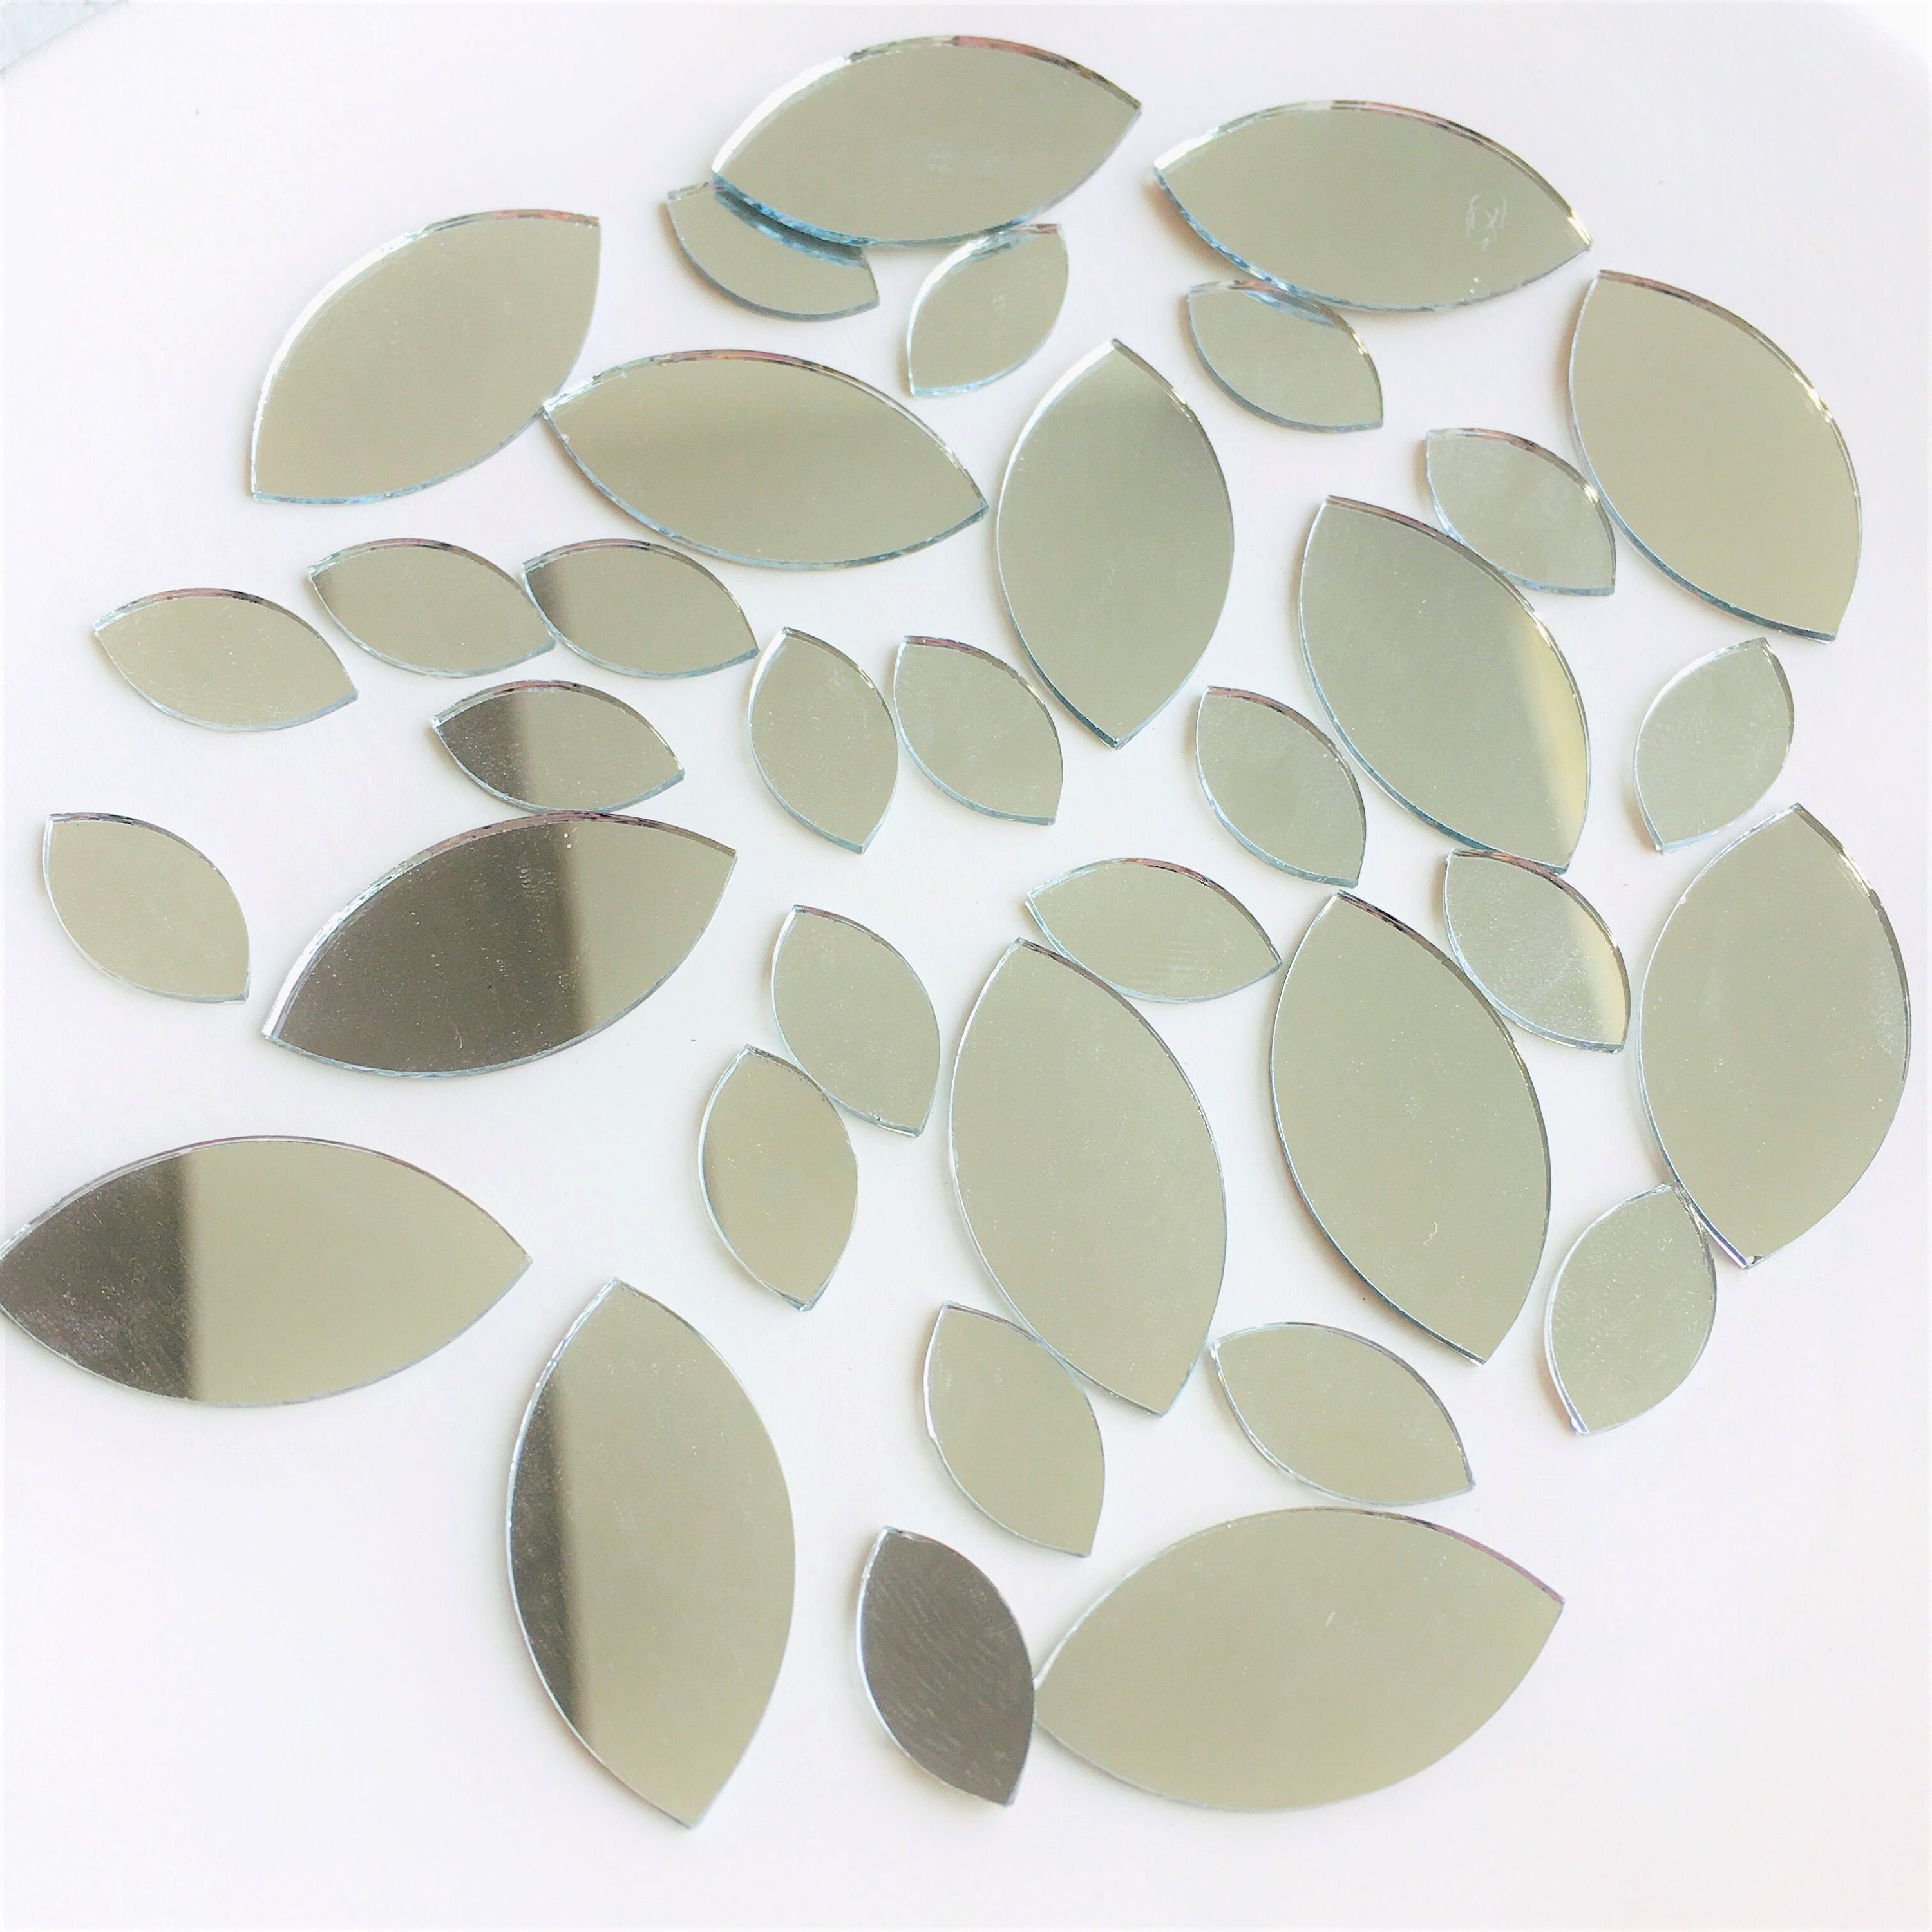 150pcs 1 X 1/2 Teardorp Shape Craft Mirrors Small Mosaic Mirror Tiles for  Craft Projects 